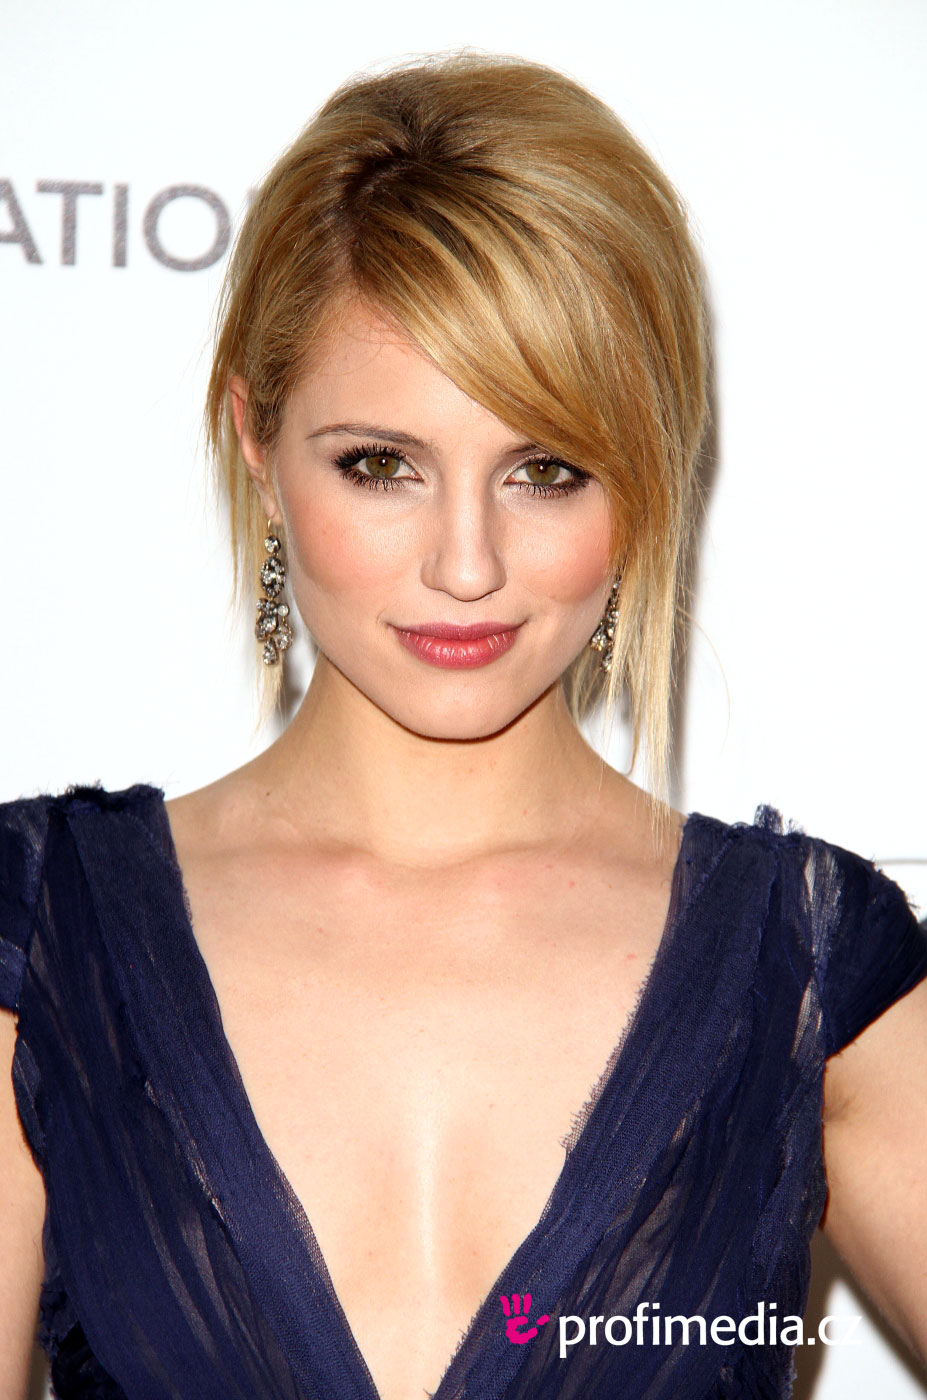 Prom hairstyle Diana Agron